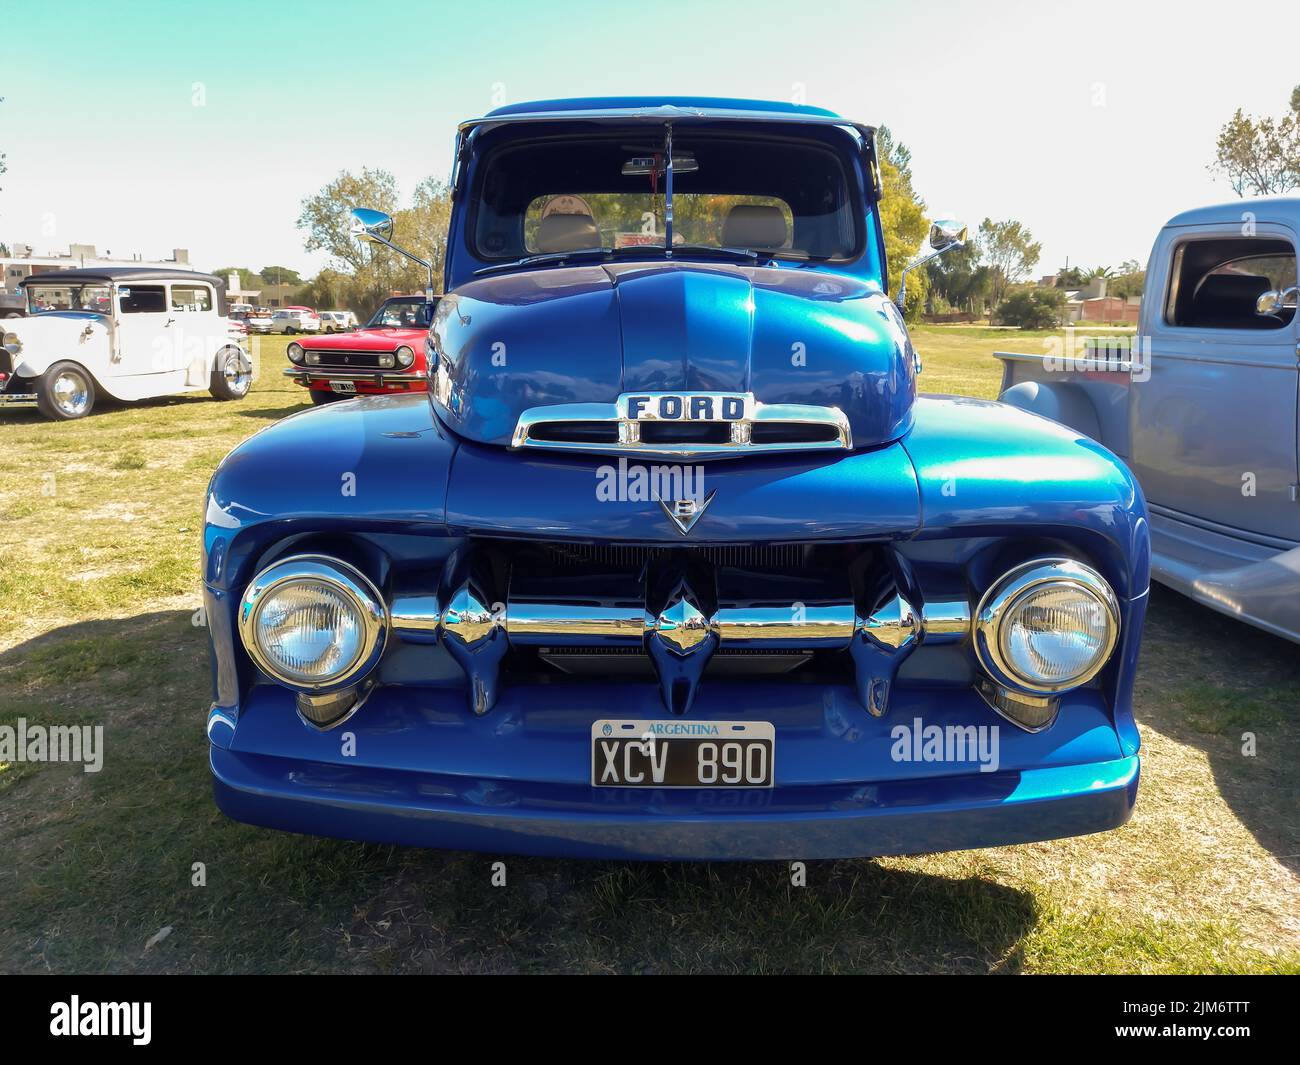 Old blue Ford F 1 V8 1950s utility pickup truck in the countryside. Front view. Grill. Nature grass and trees. Classic car show. Stock Photo